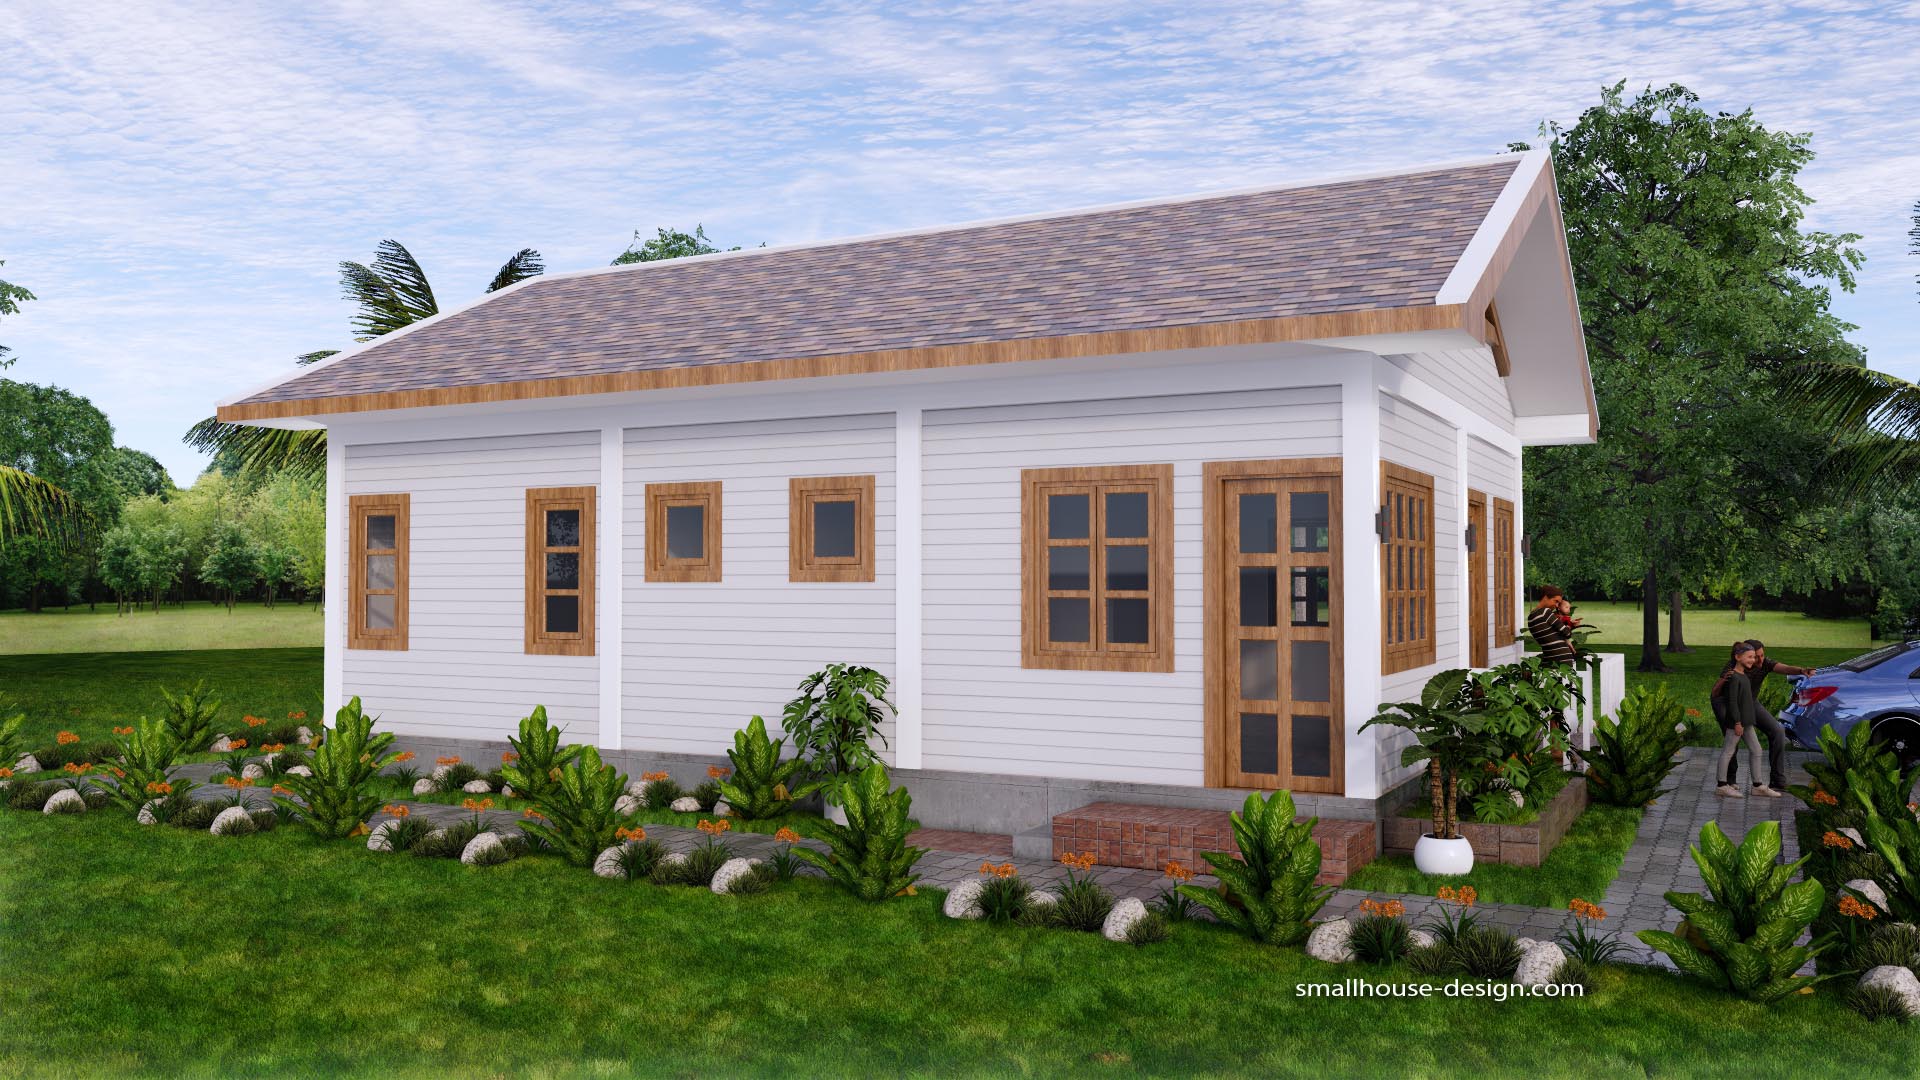 Small House Design 7x10 Meter 3 Beds PDF Plan - Small House Design Plan